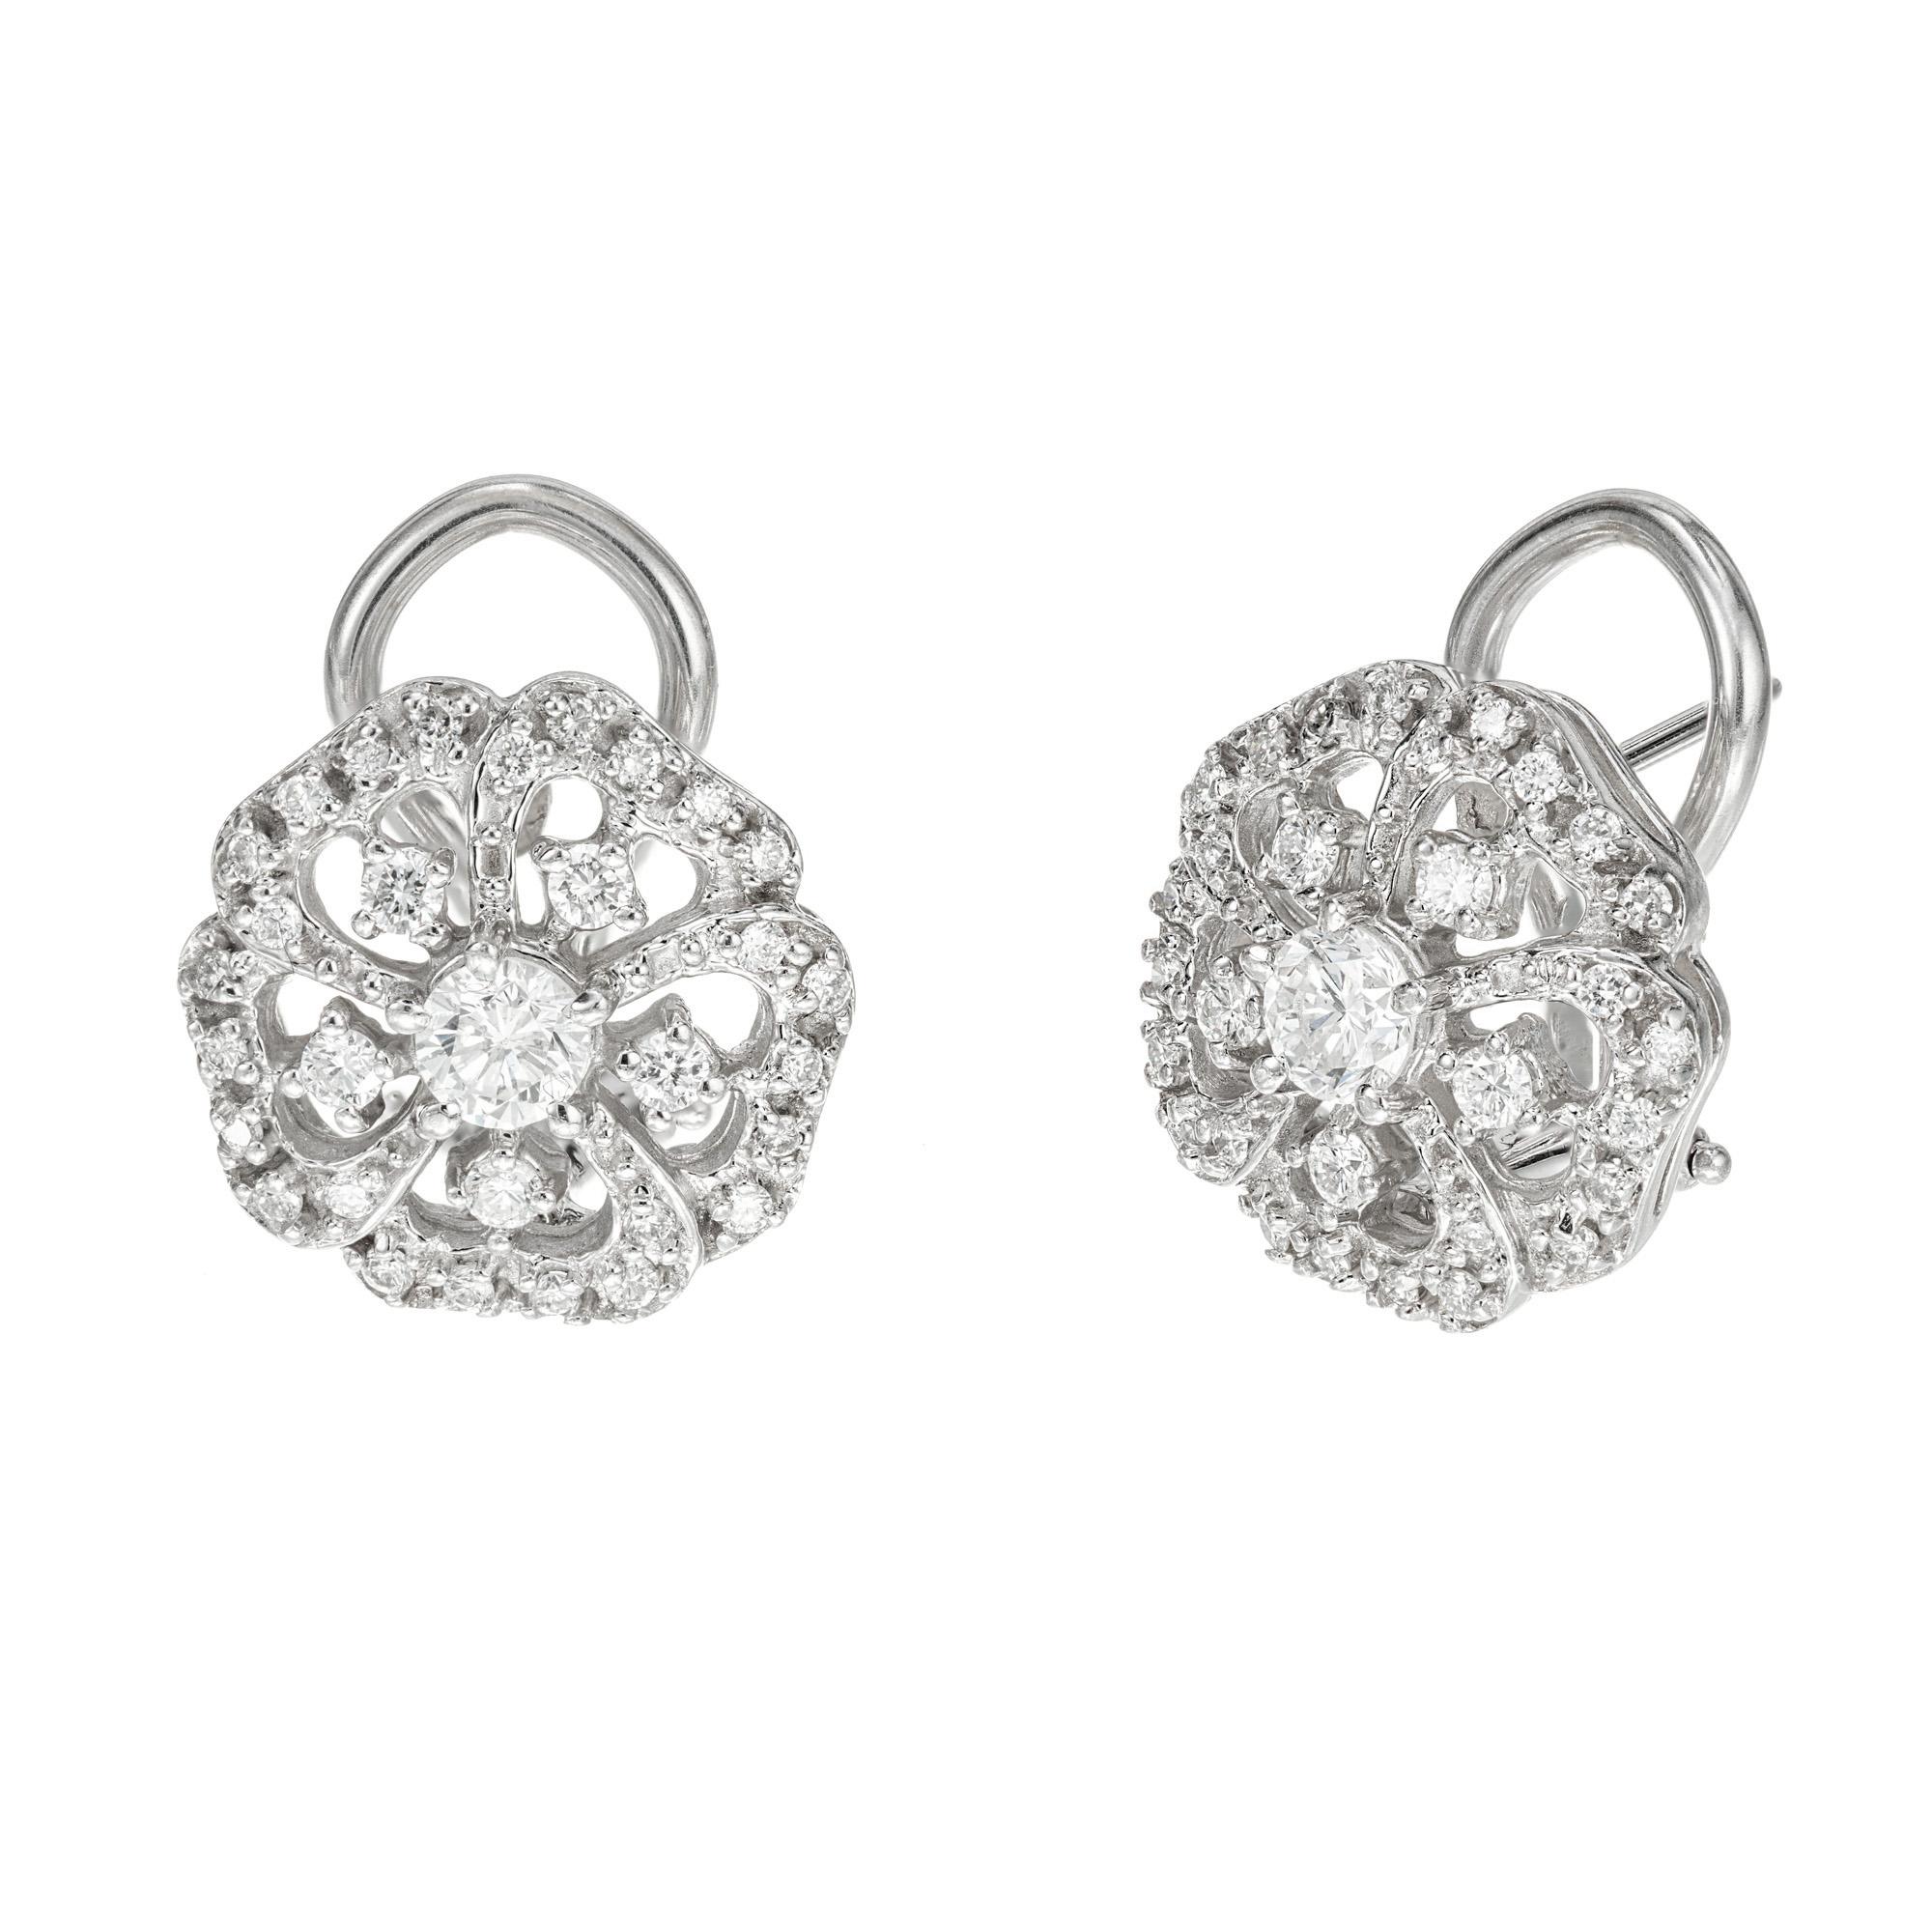 Vintage 1960's open work button style diamond earrings. 62 round brilliant cut diamonds set in 14k white gold clip post settings. 

62 round brilliant cut diamonds, G-H VS-SI approx. .65cts
14k white gold 
Stamped: 14k
6.4 grams
Top to bottom: